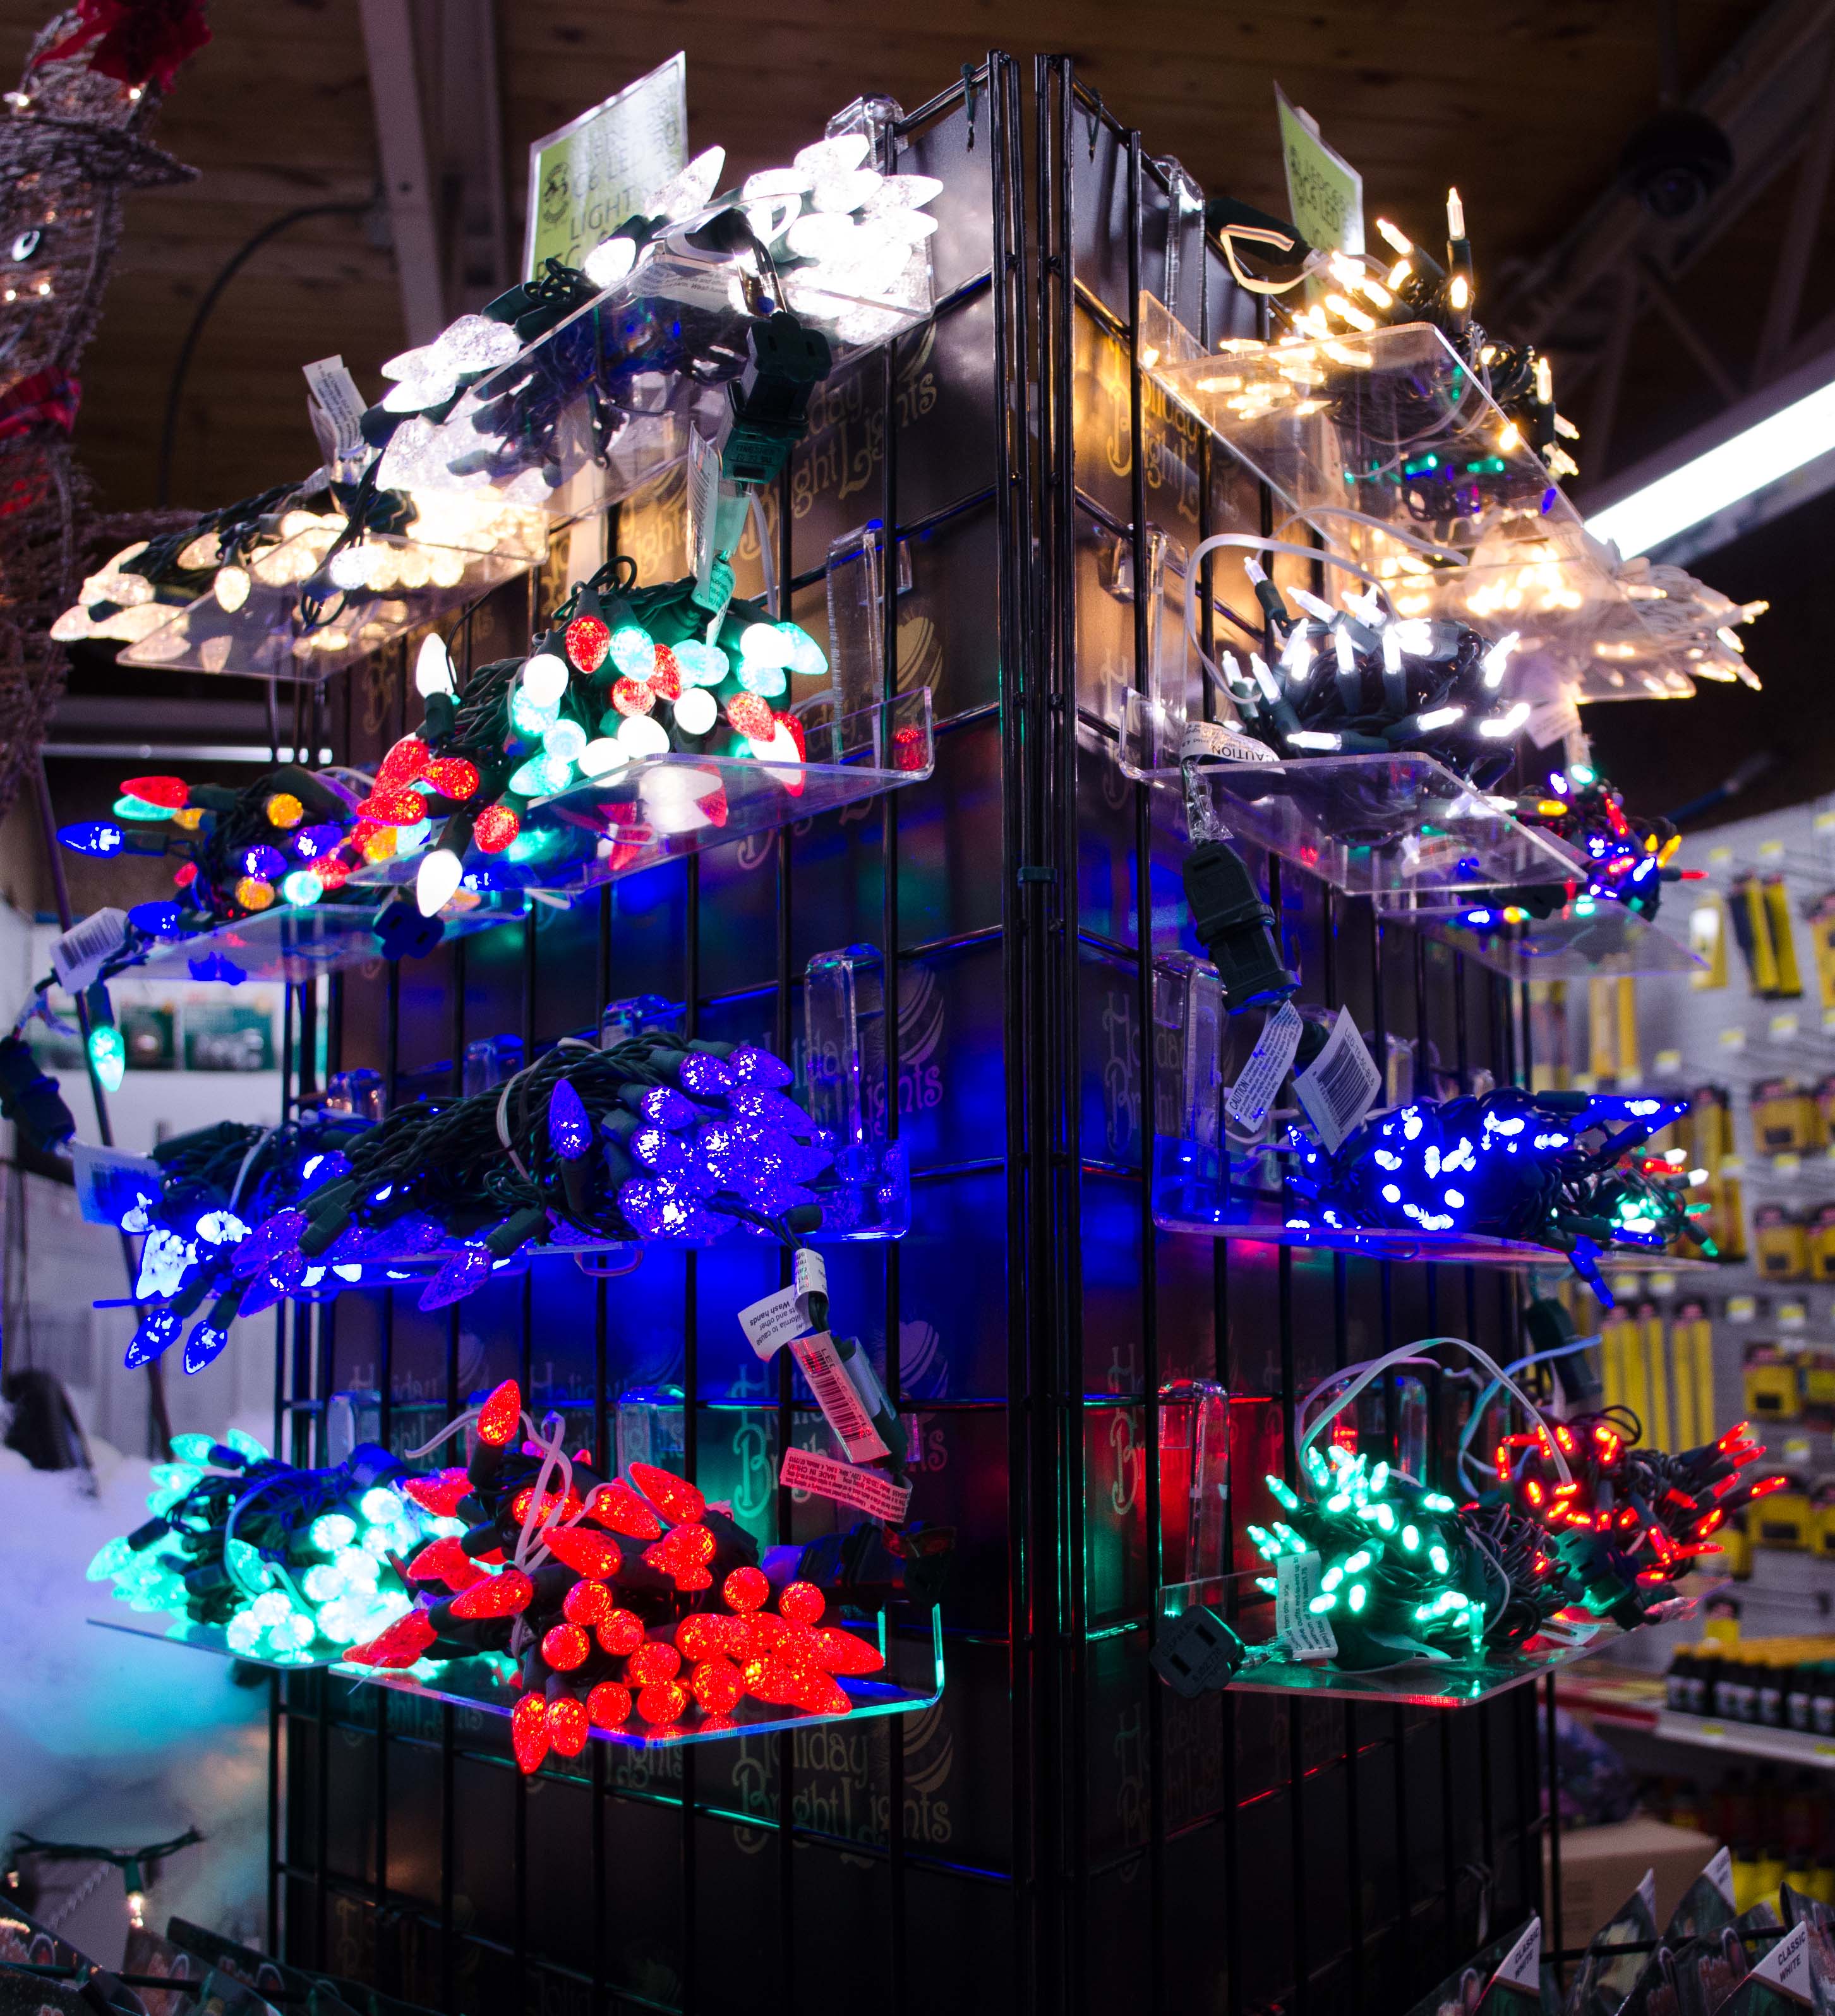 Christmas lights in all colors and shapes - Smith and Edwards